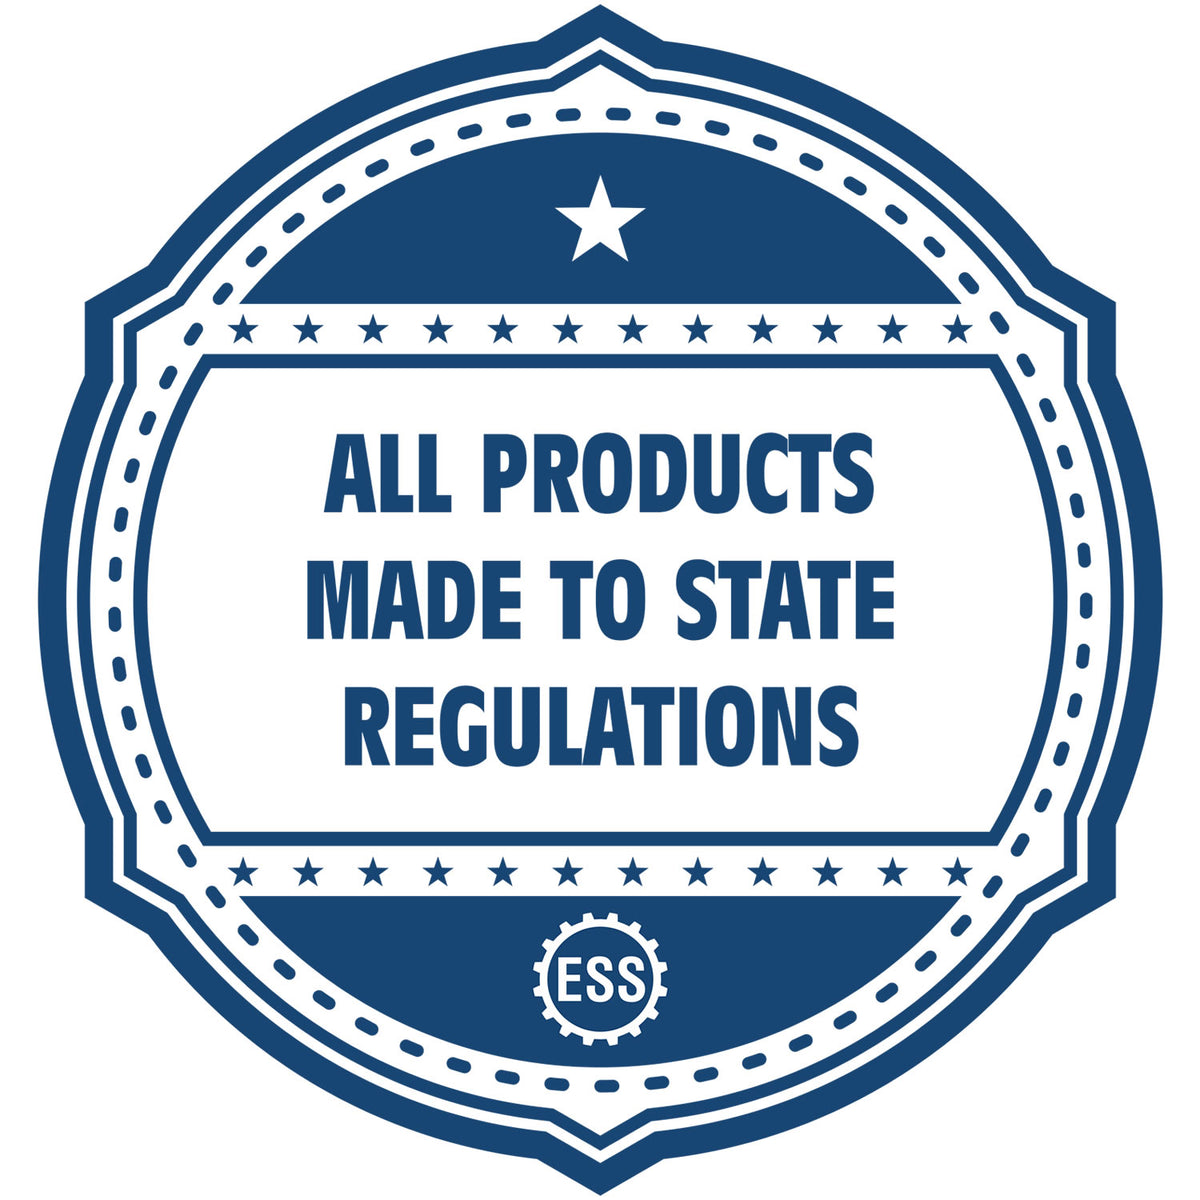 An icon or badge element for the Premium MaxLight Pre-Inked Massachusetts Engineering Stamp showing that this product is made in compliance with state regulations.